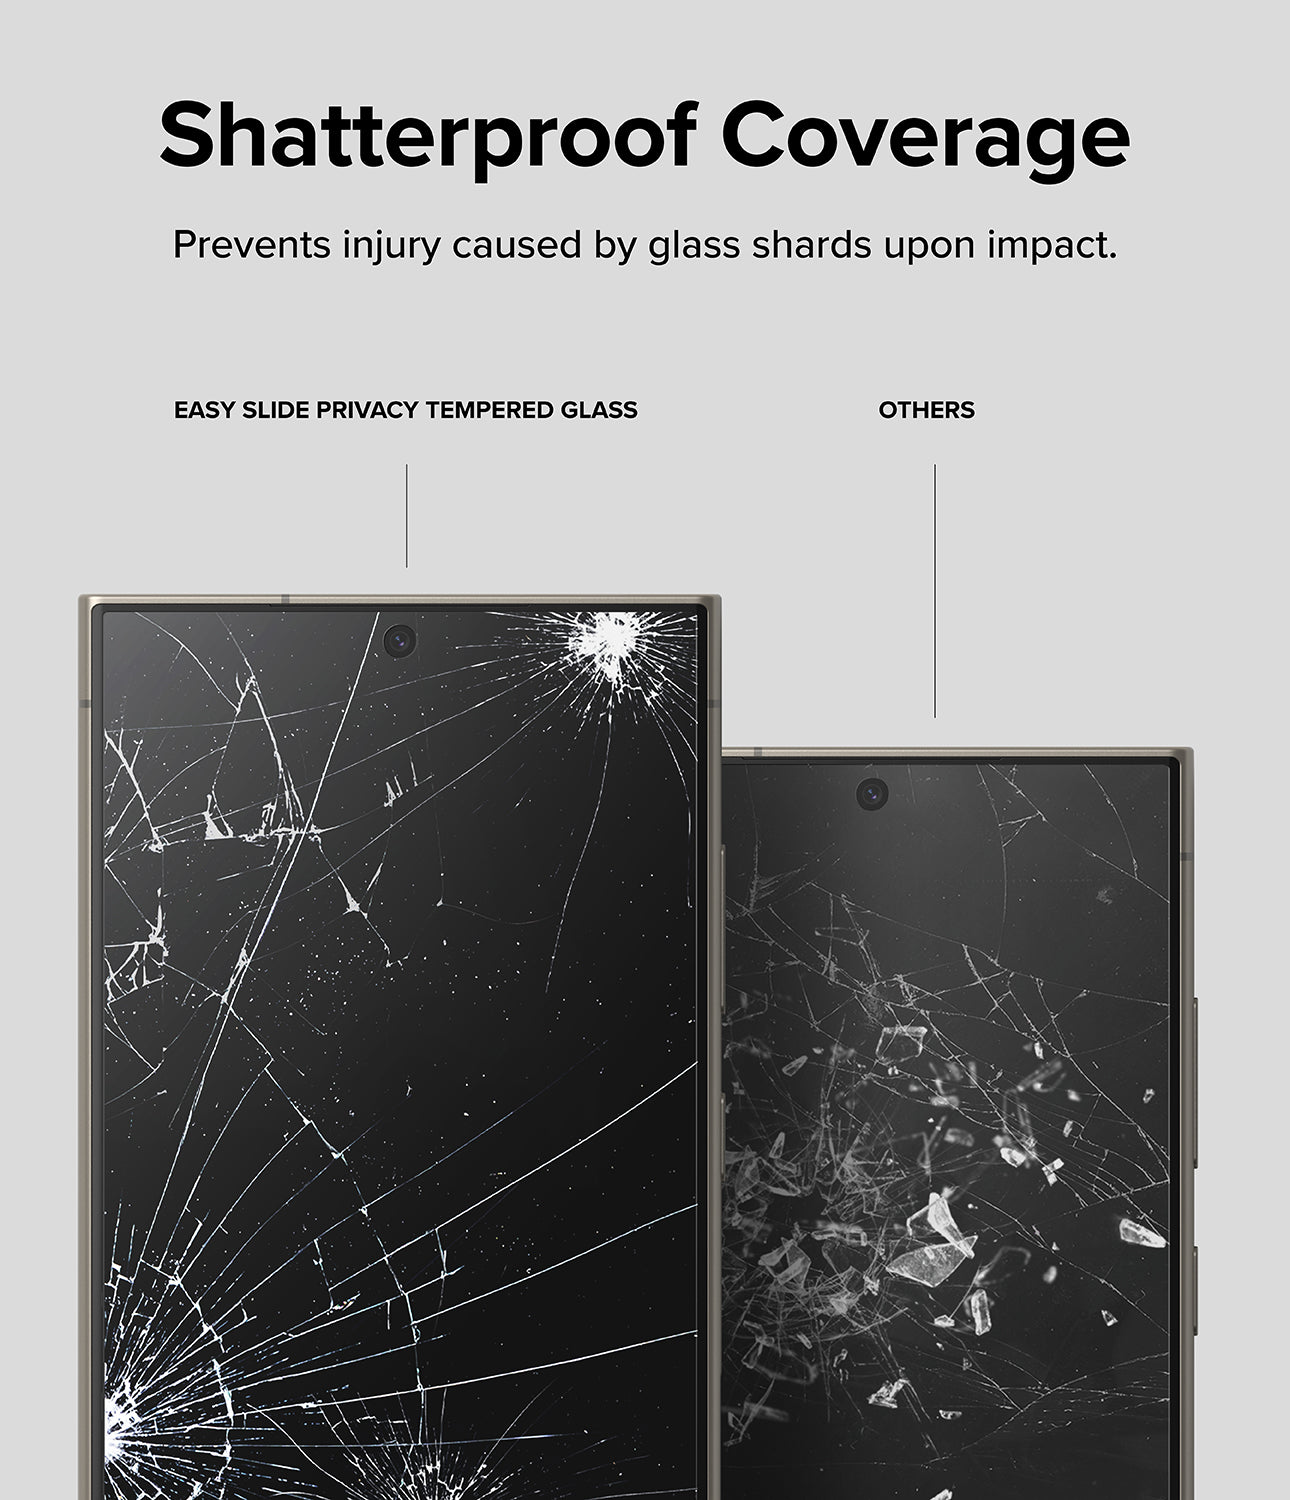 Galaxy S24 Ultra Screen Protector | Easy Slide Privacy Tempered Glass - Shatterproof Coverage. Prevents injury caused by glass shards upon impact.